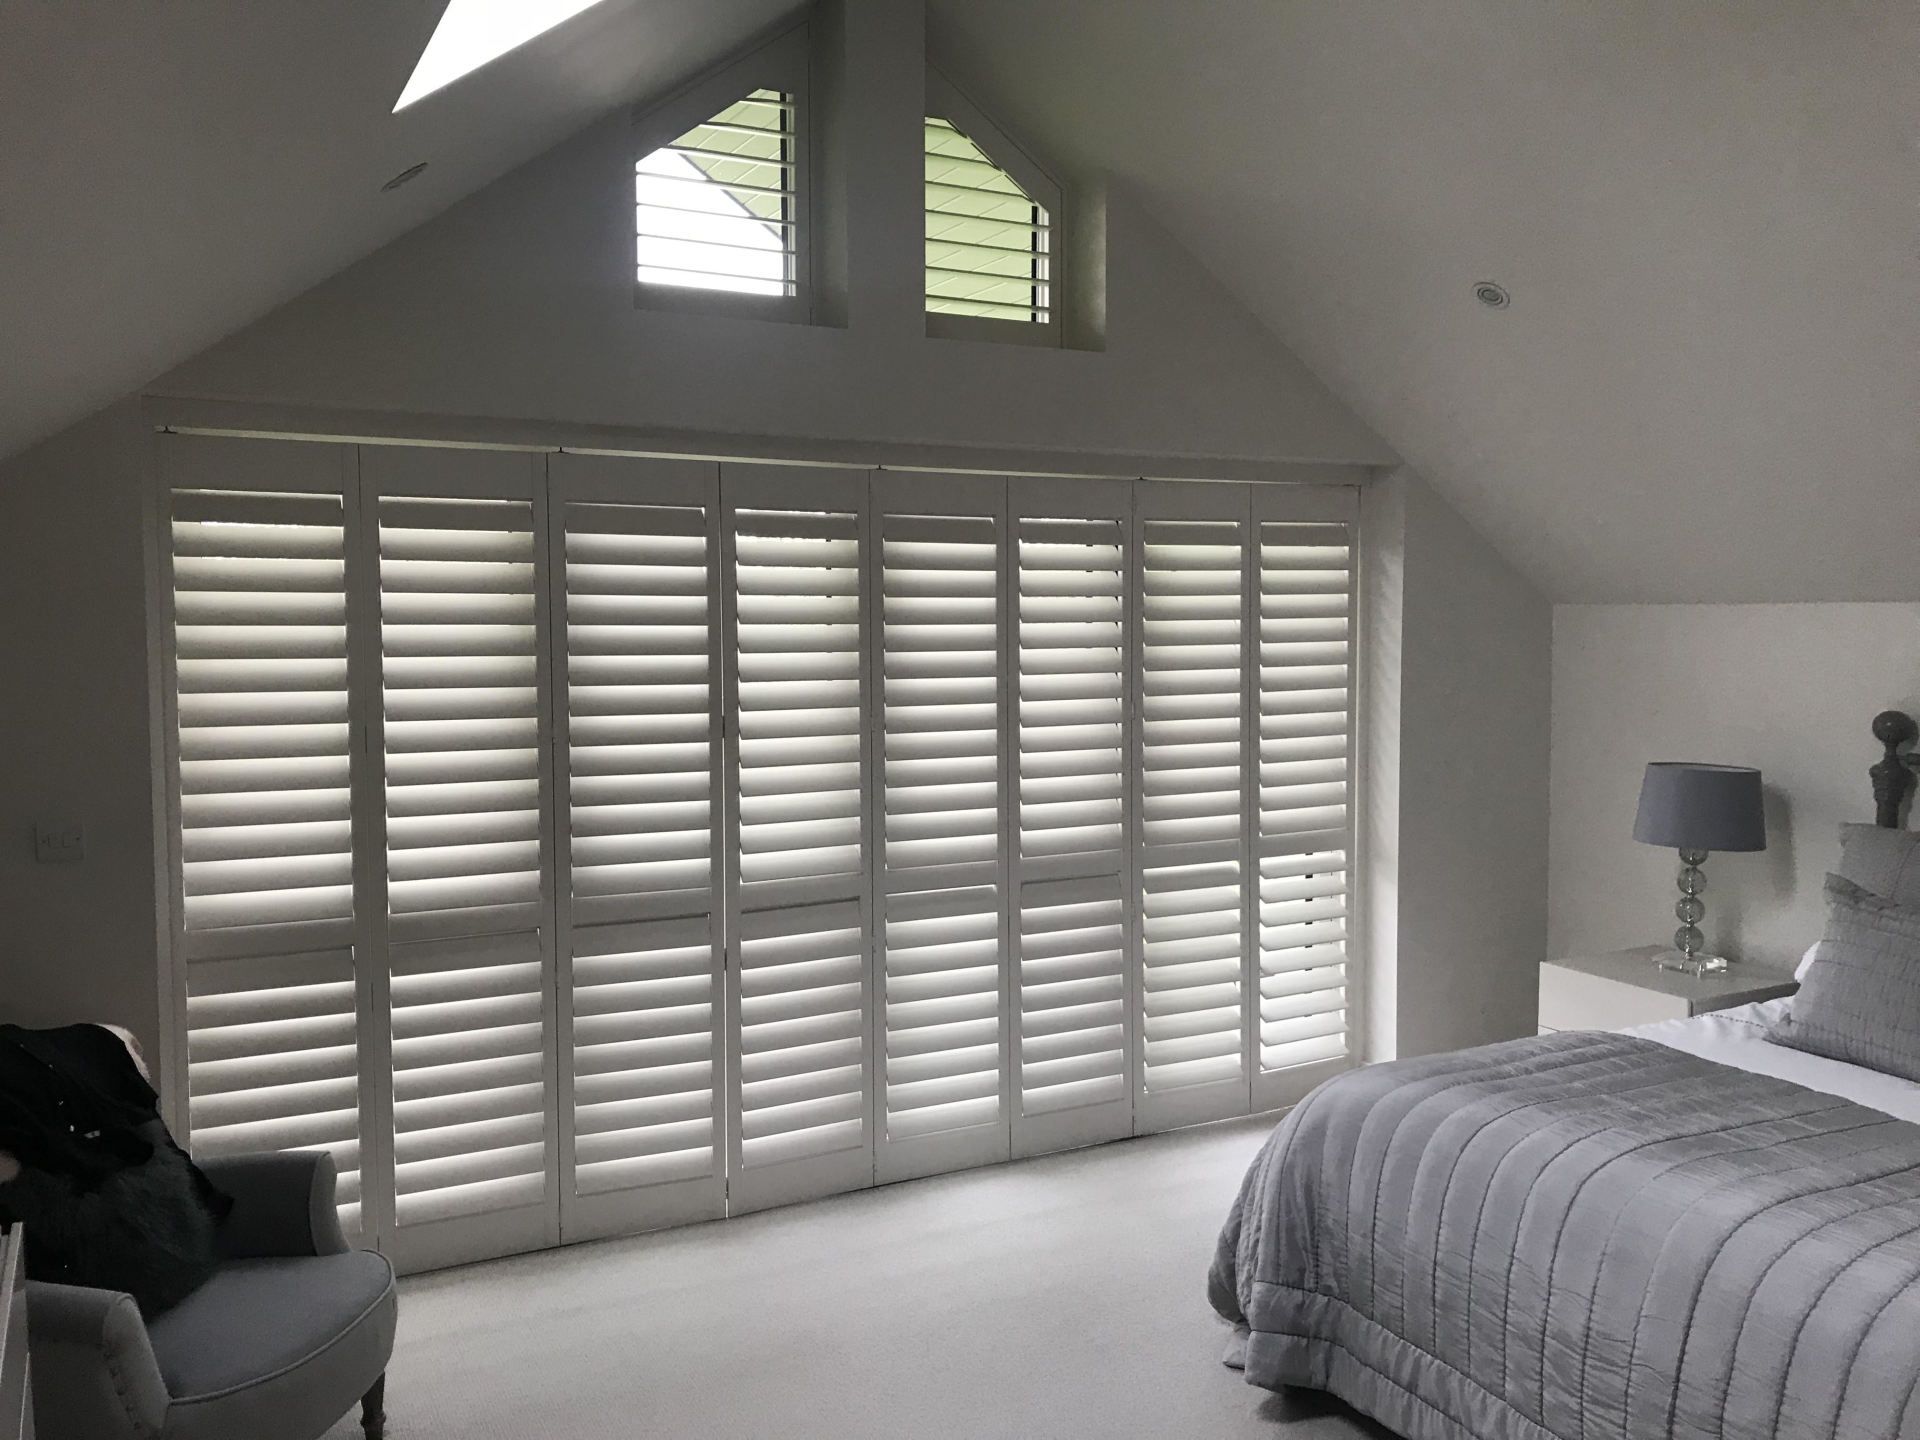 British Made Shutters available to purchase in Walton-on-Thames | Wooden Shutters British Made Shutters available to purchase in Walton-on-Thames | Wooden Shutters | Patio Door Shutters |  Made-to-Measure Shutters| Patio Door Shutters |  Made-to-Measure Shutters